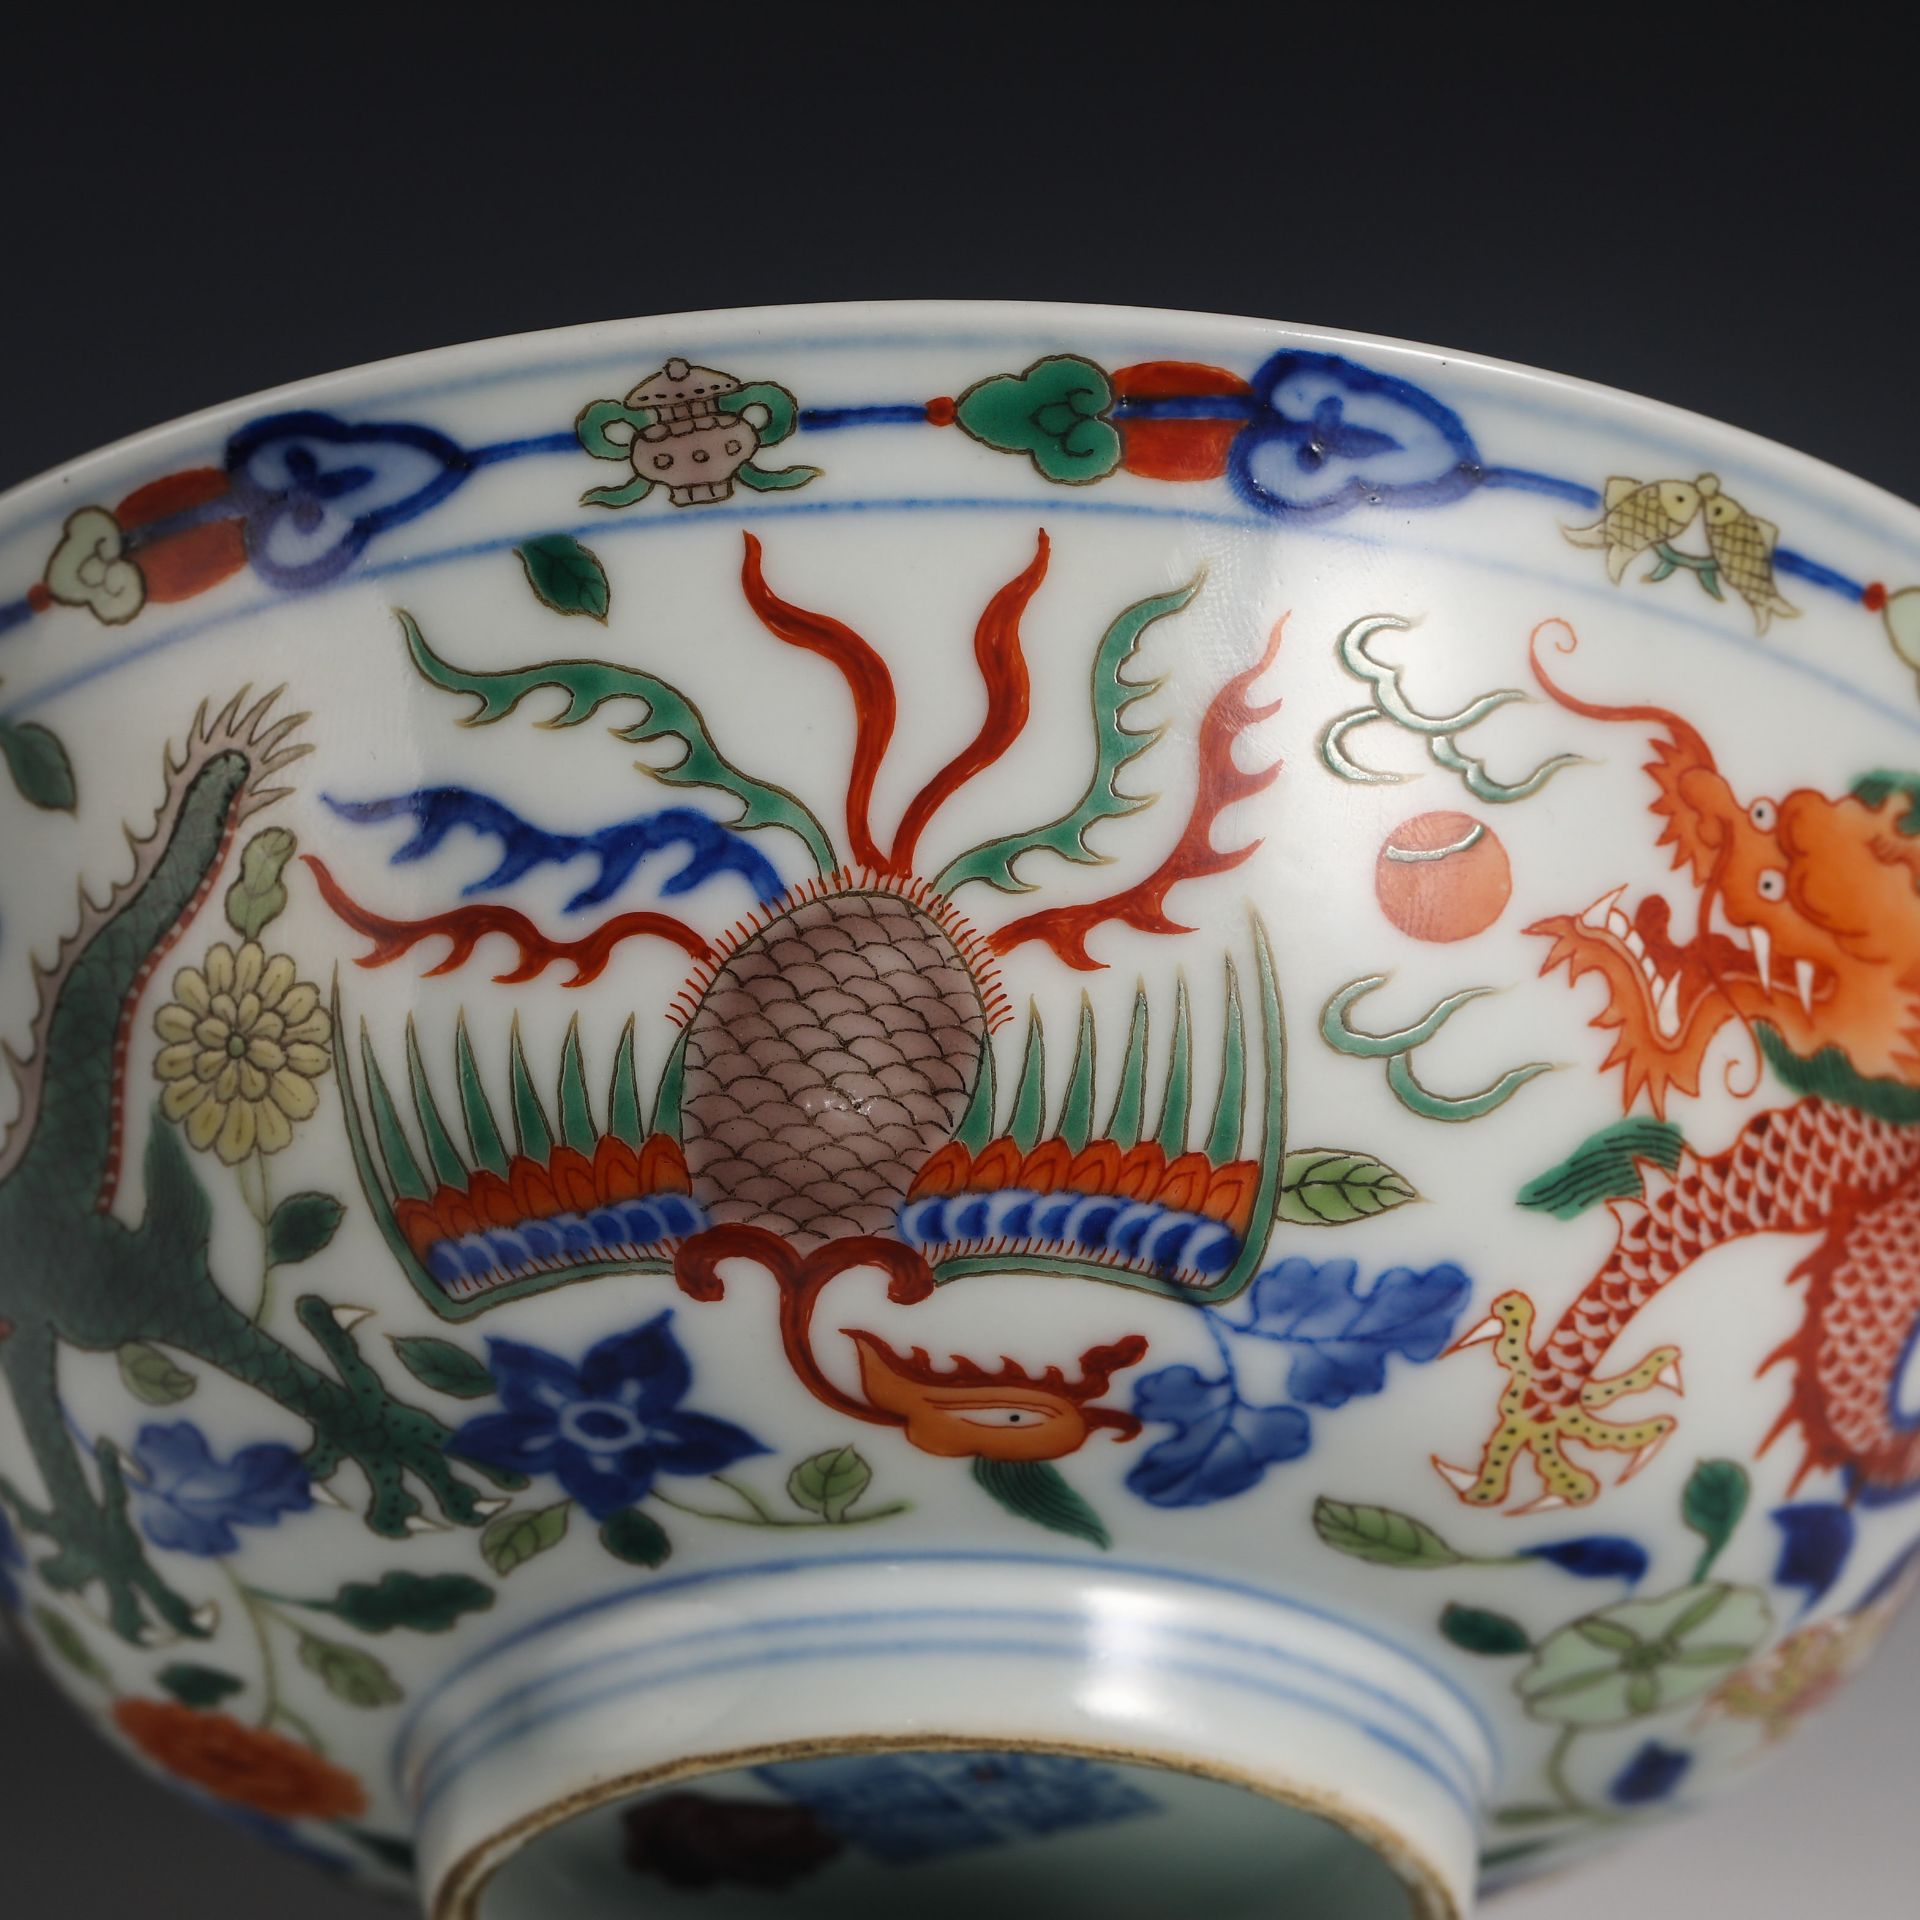 Pair of Multicoloured Dragon and Phoenix Bowls, 18th Century - Image 3 of 10